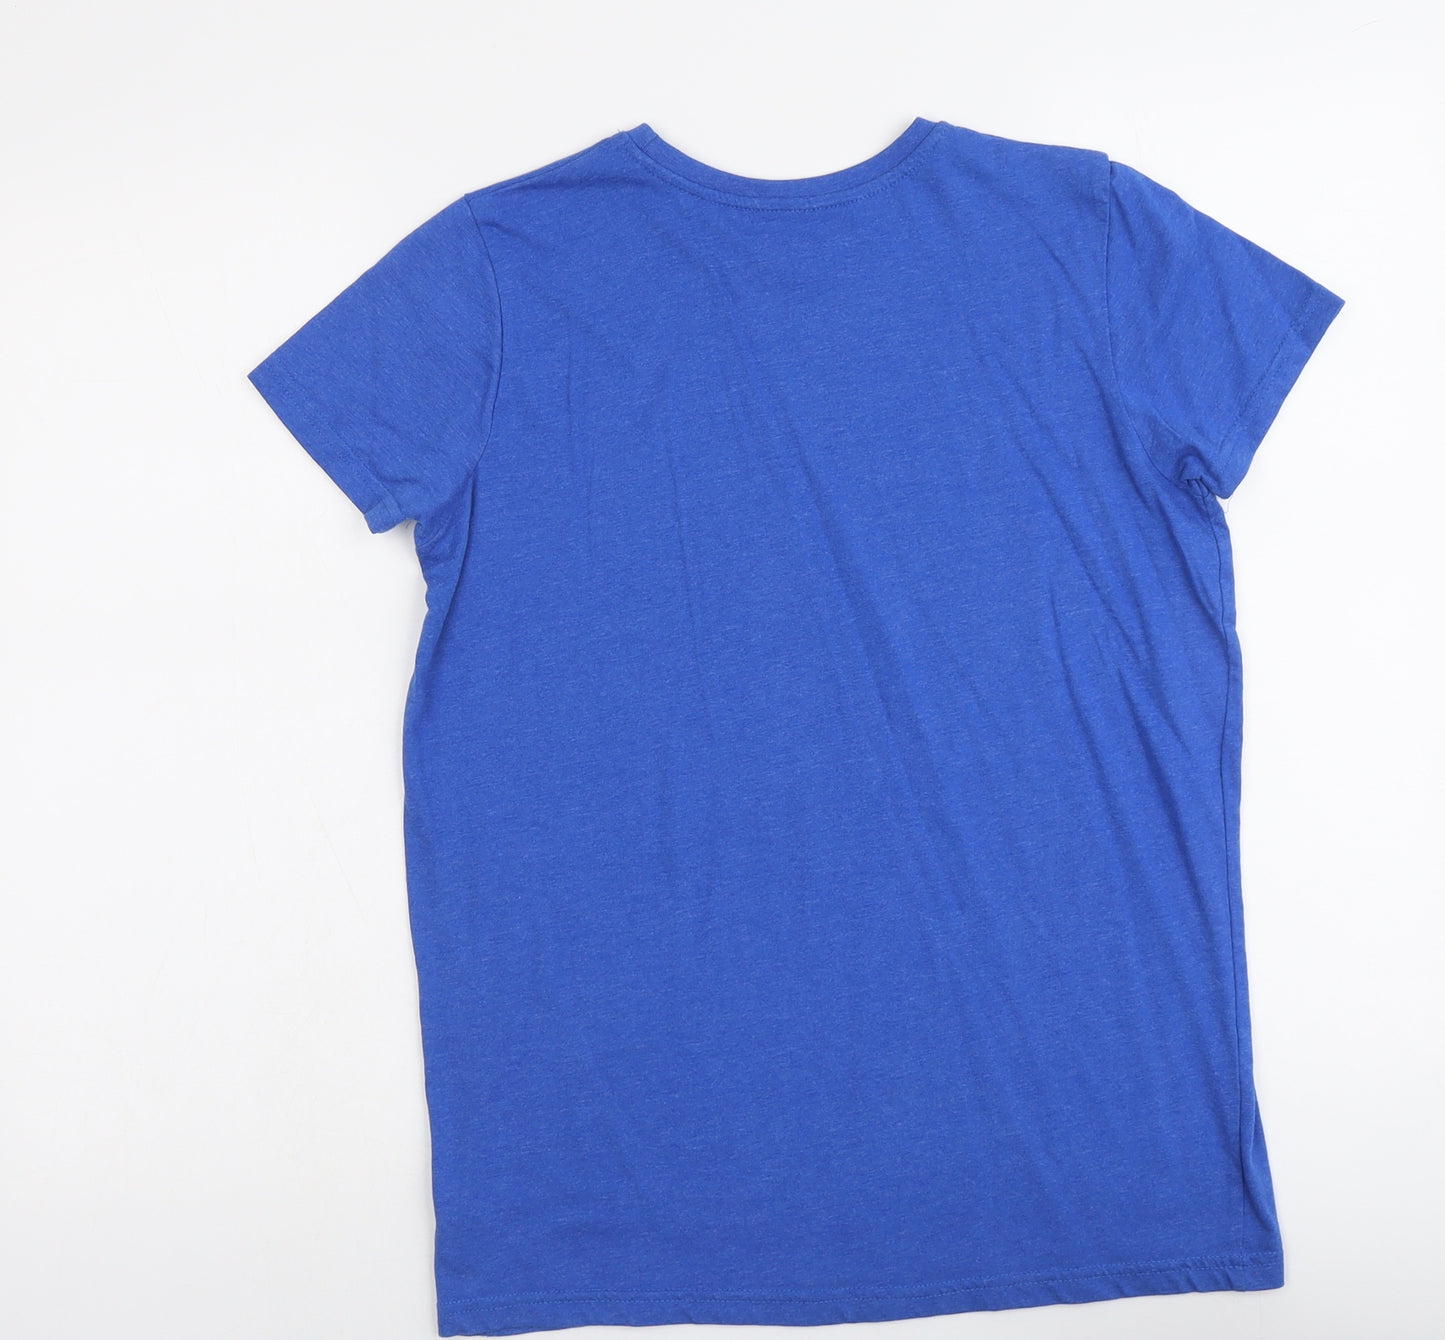 Primark Boys Blue Cotton Basic T-Shirt Size 13-14 Years Round Neck Pullover - California